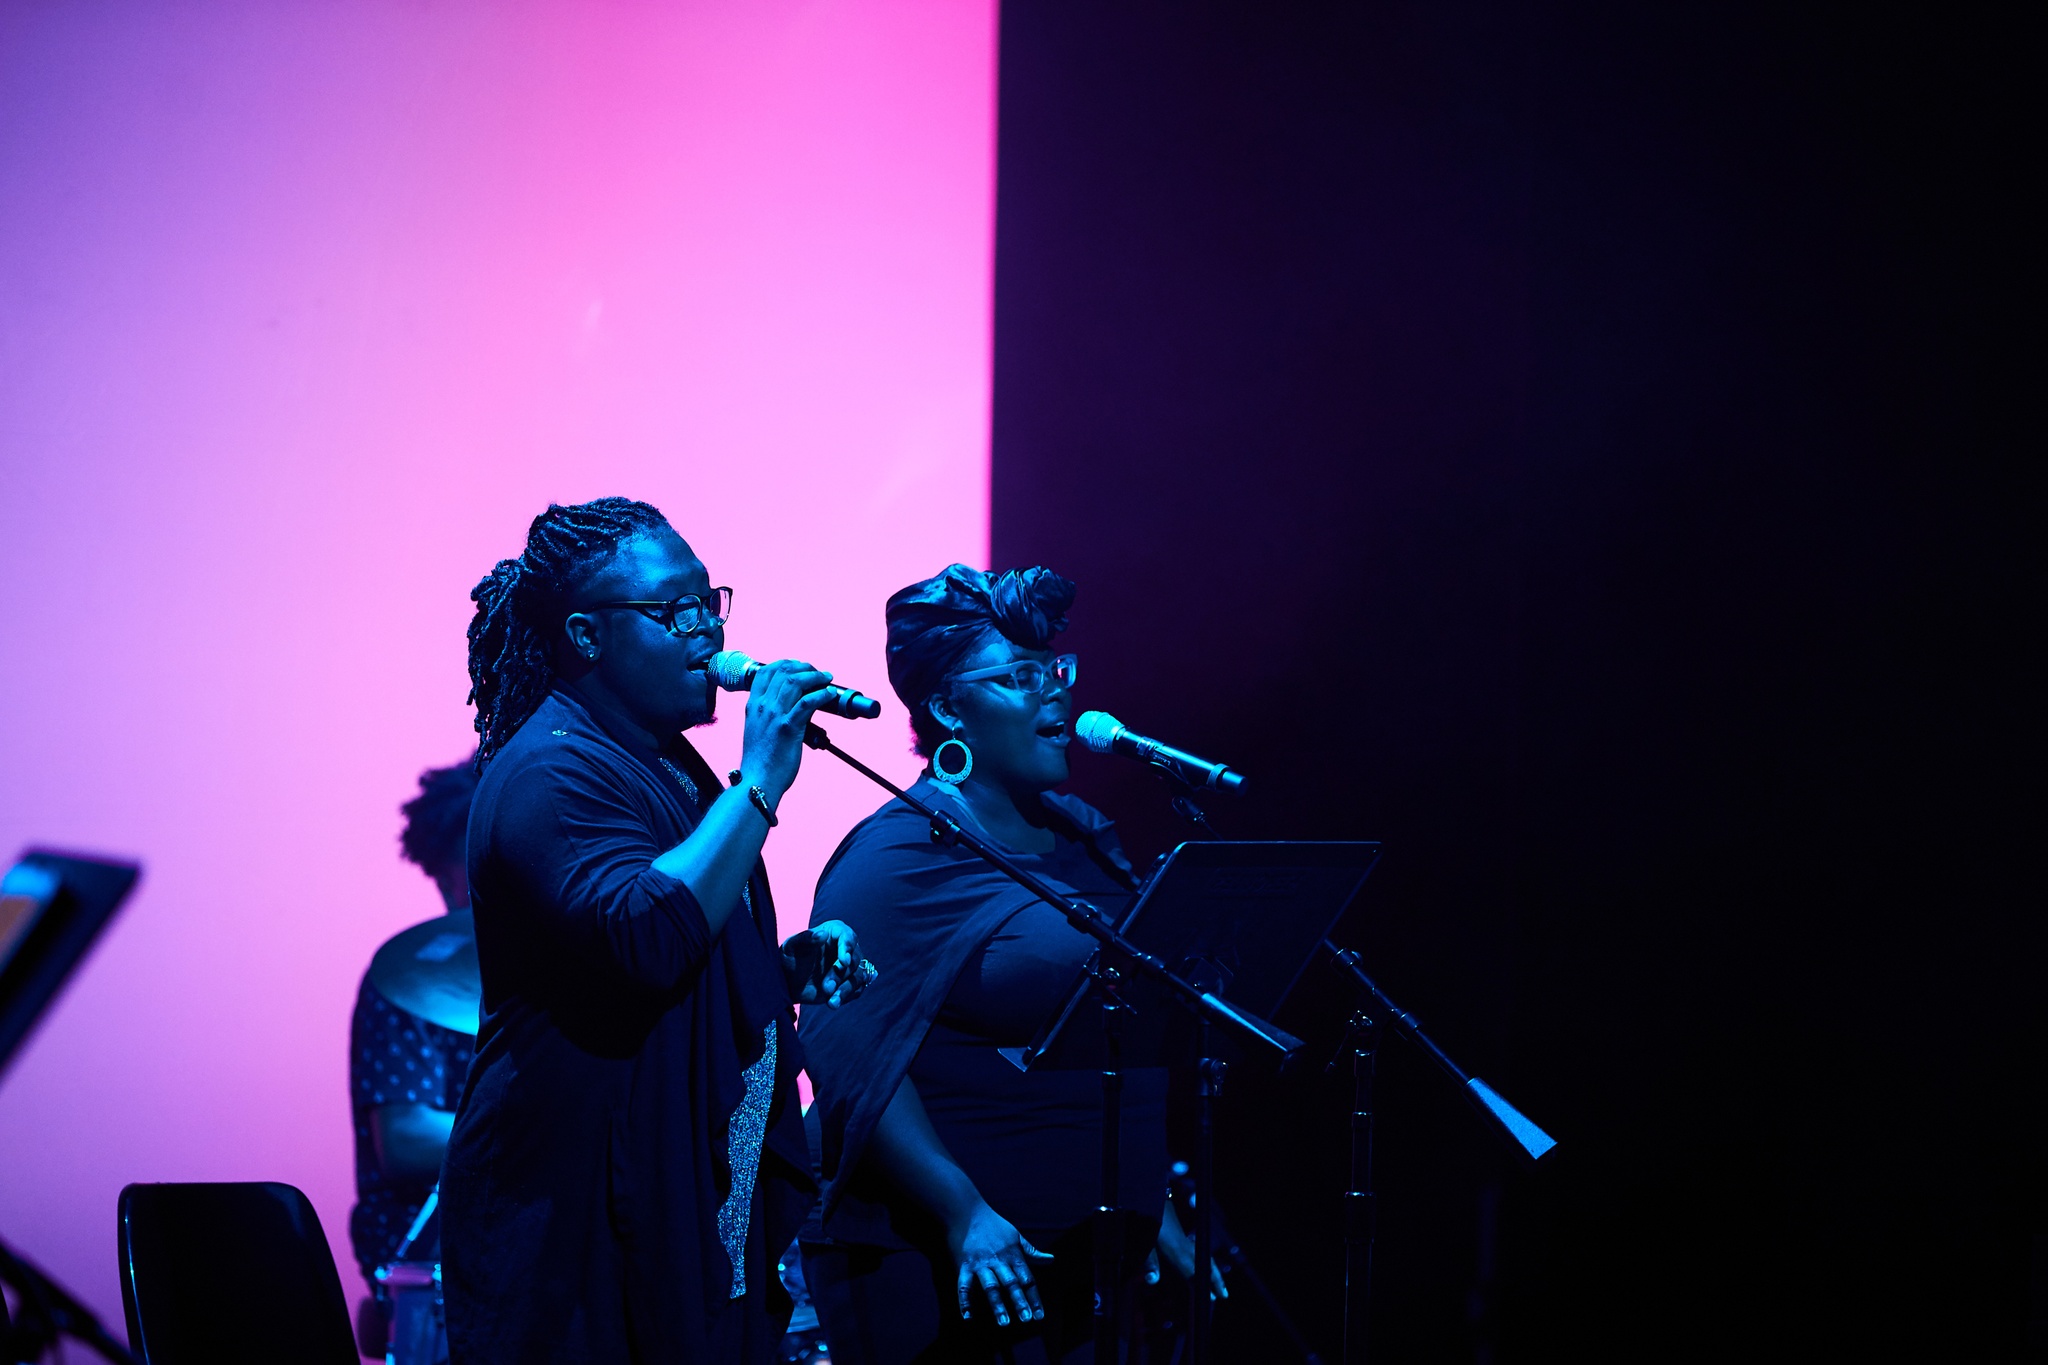 Two performers singing on blue-lit stage in front of large pink screen.